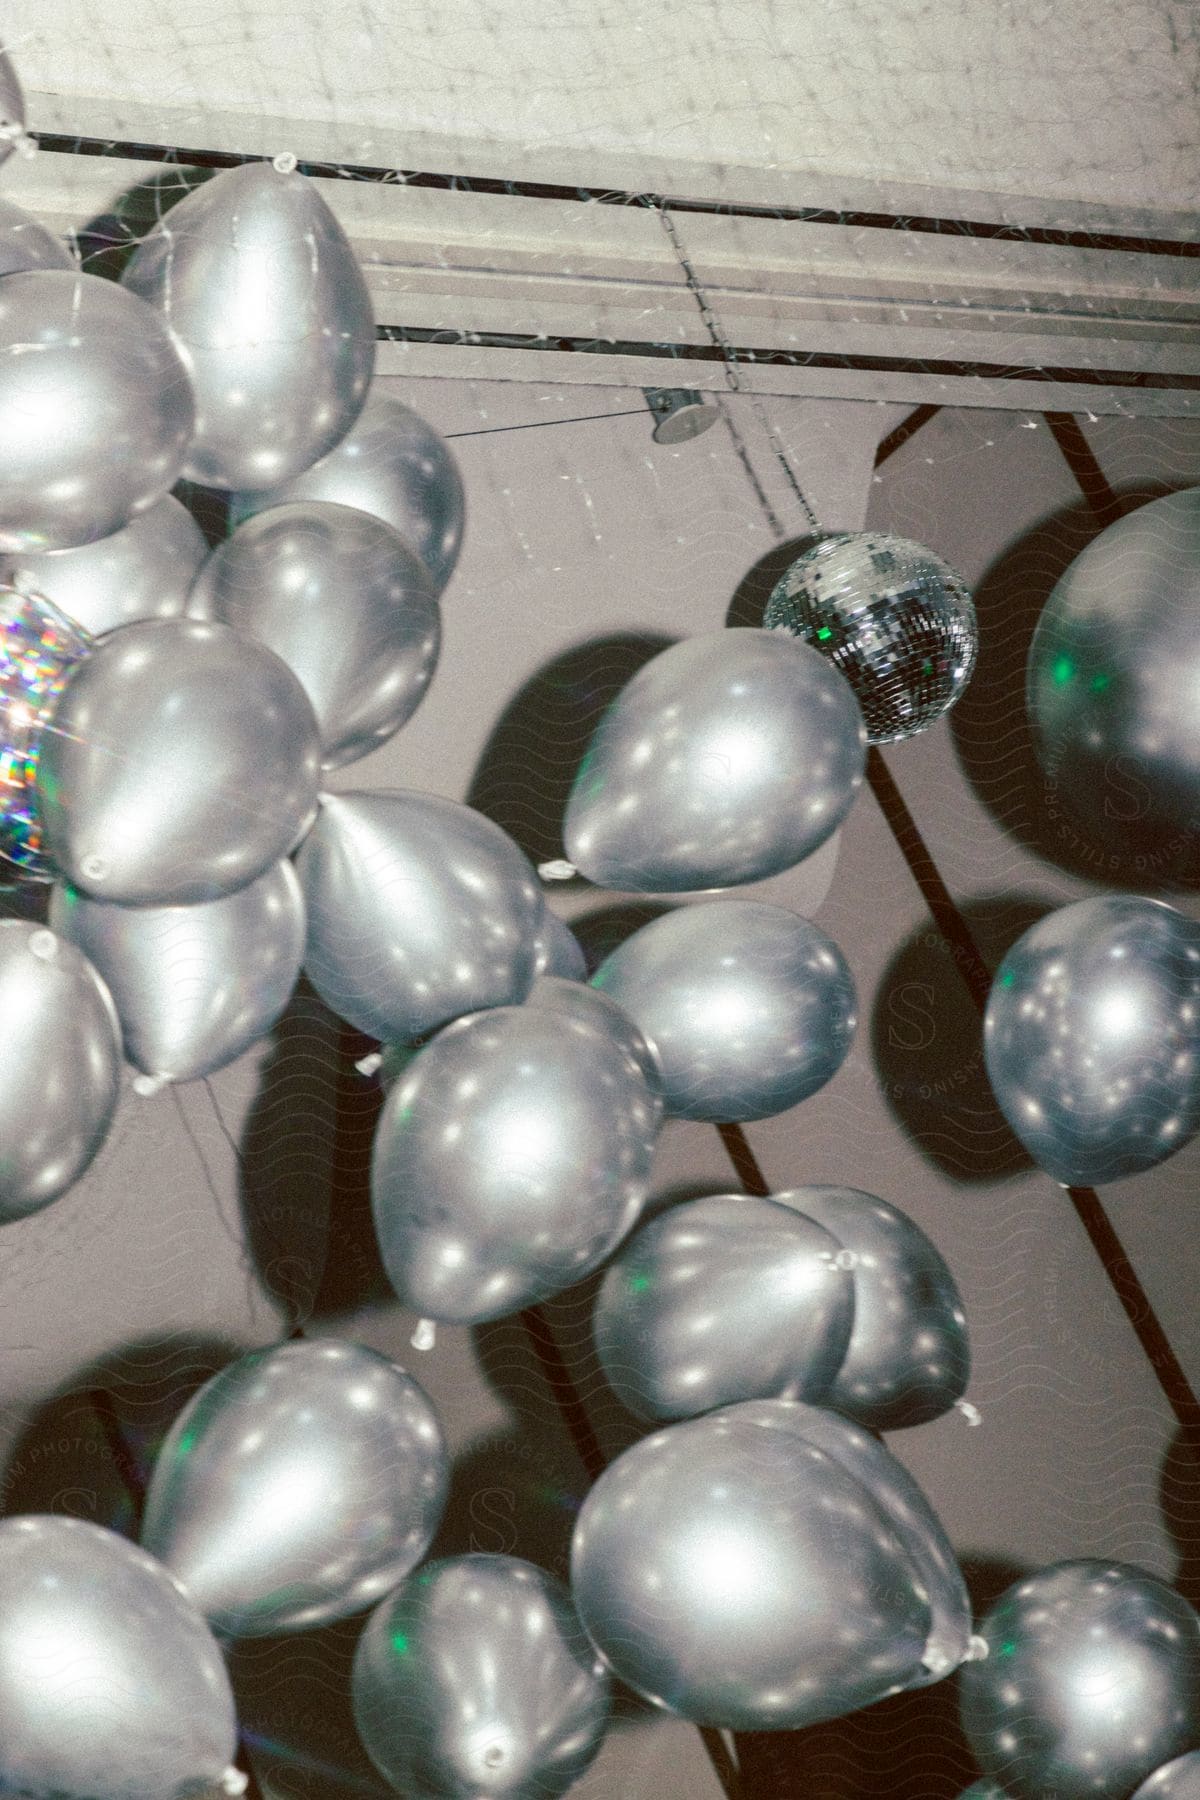 View of silver balloons and a shiny disco ball in an indoor setting.